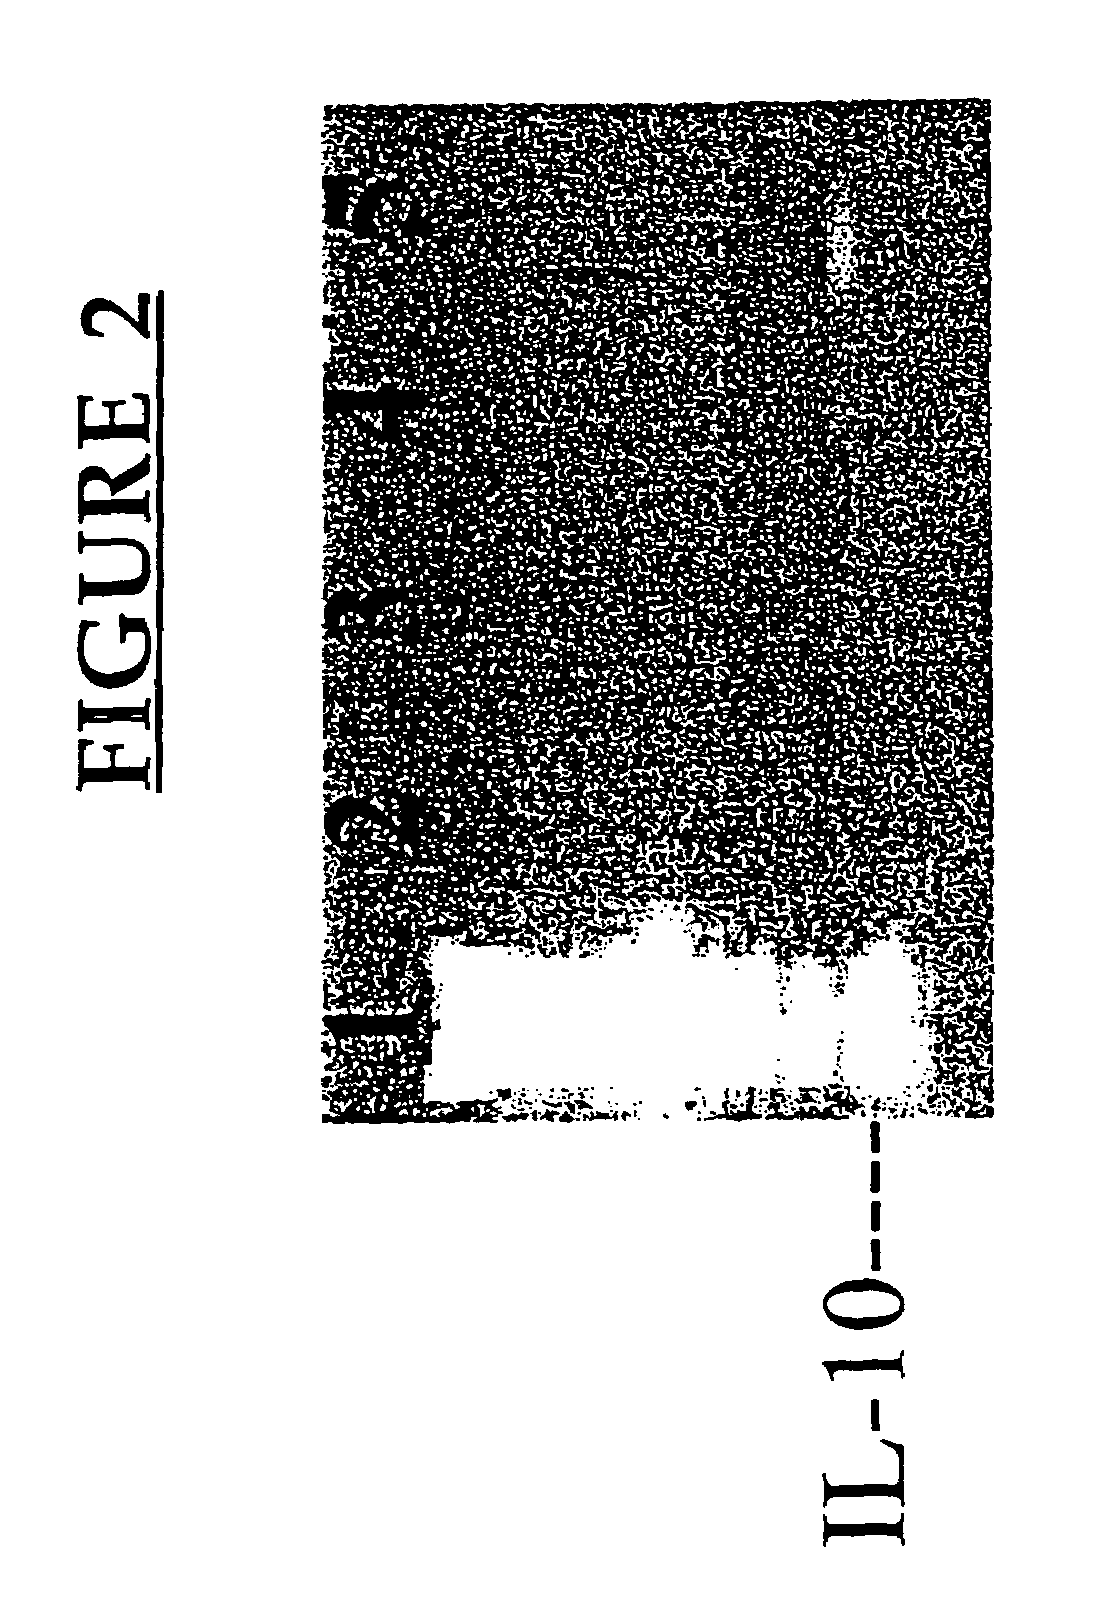 Methods of treating allergy by administering a CD200 protein